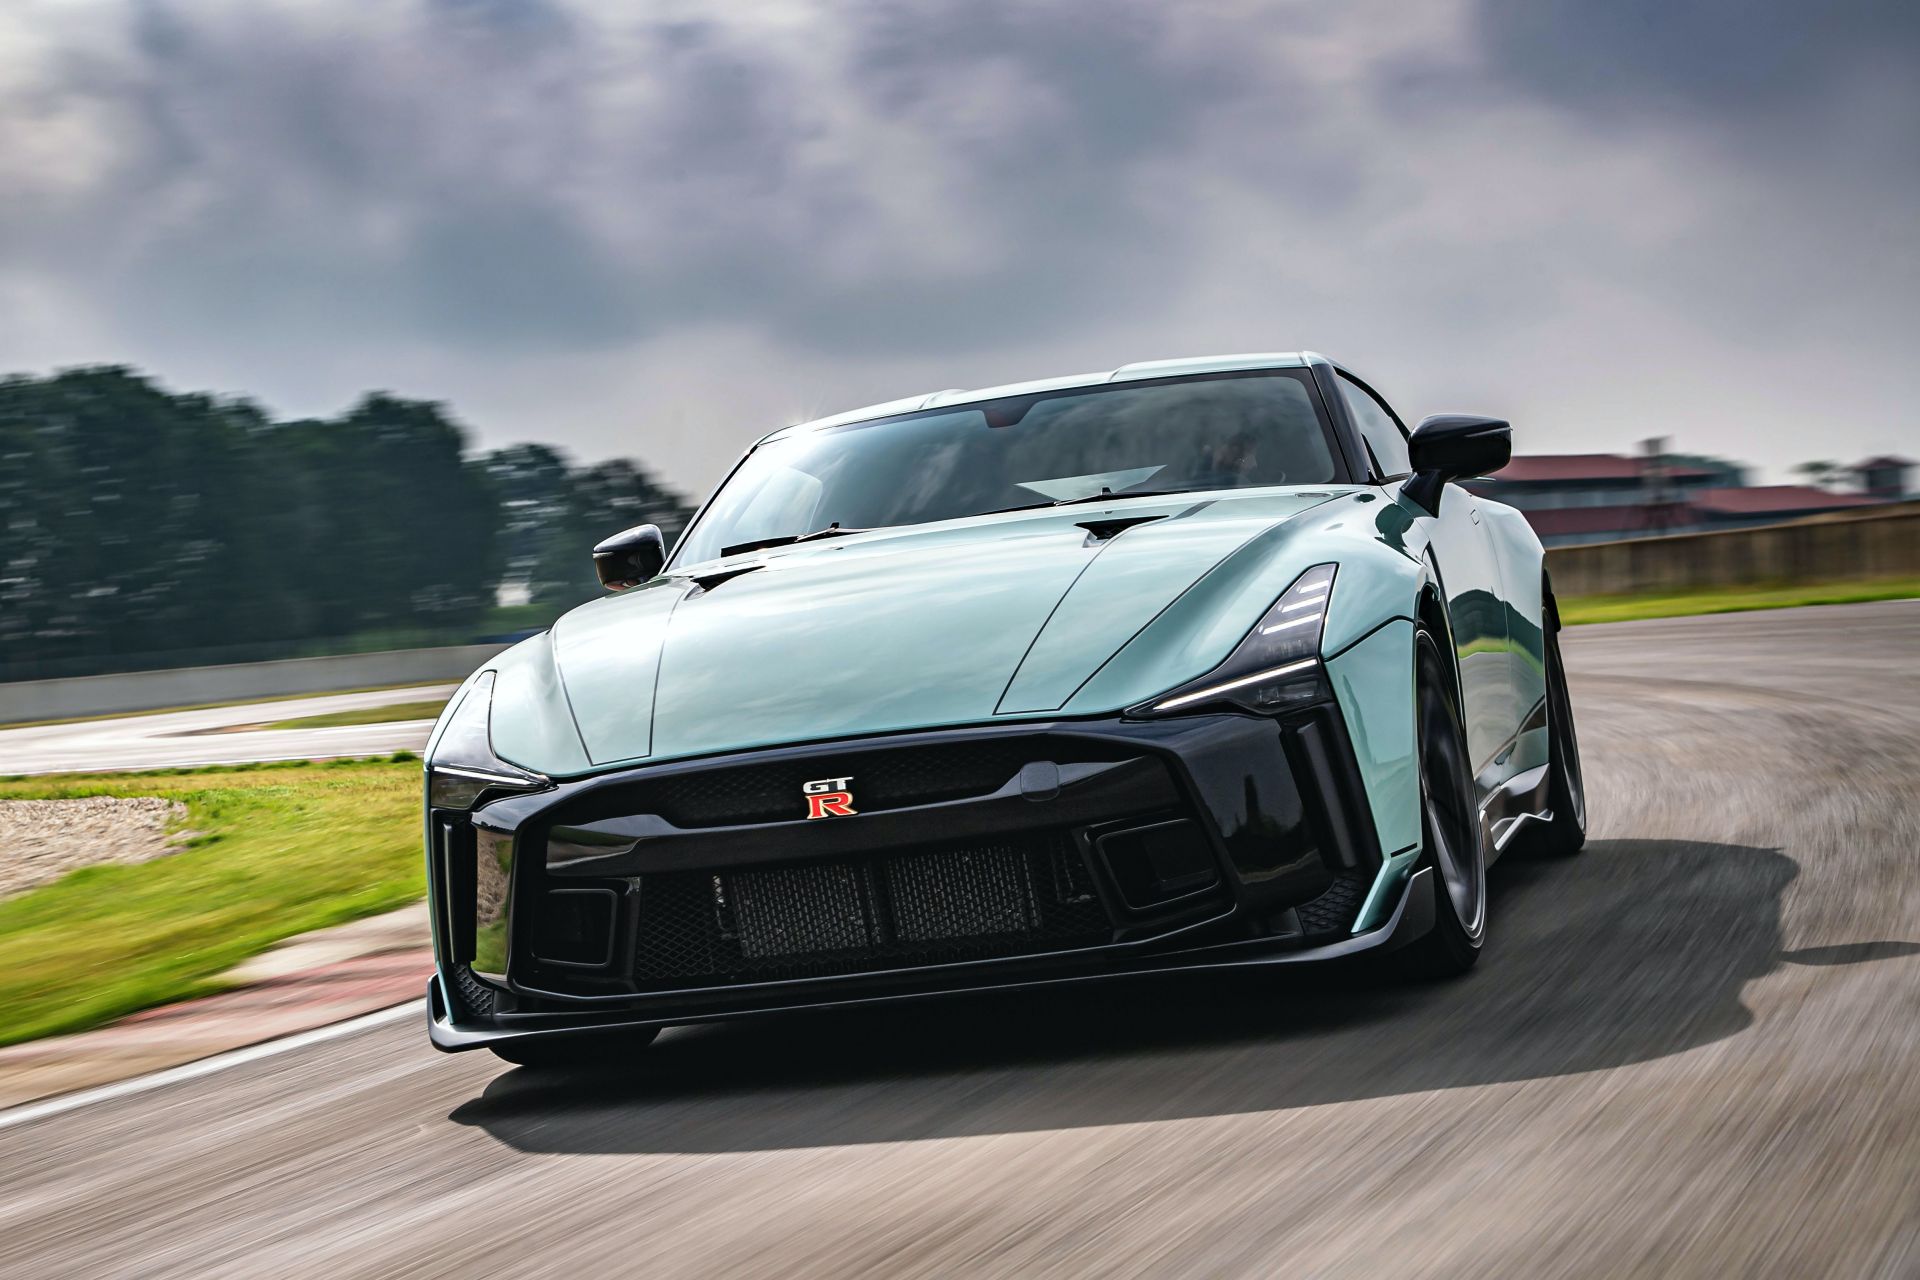 When will Nissan build the R36 GT-R: 50 years of GT-R